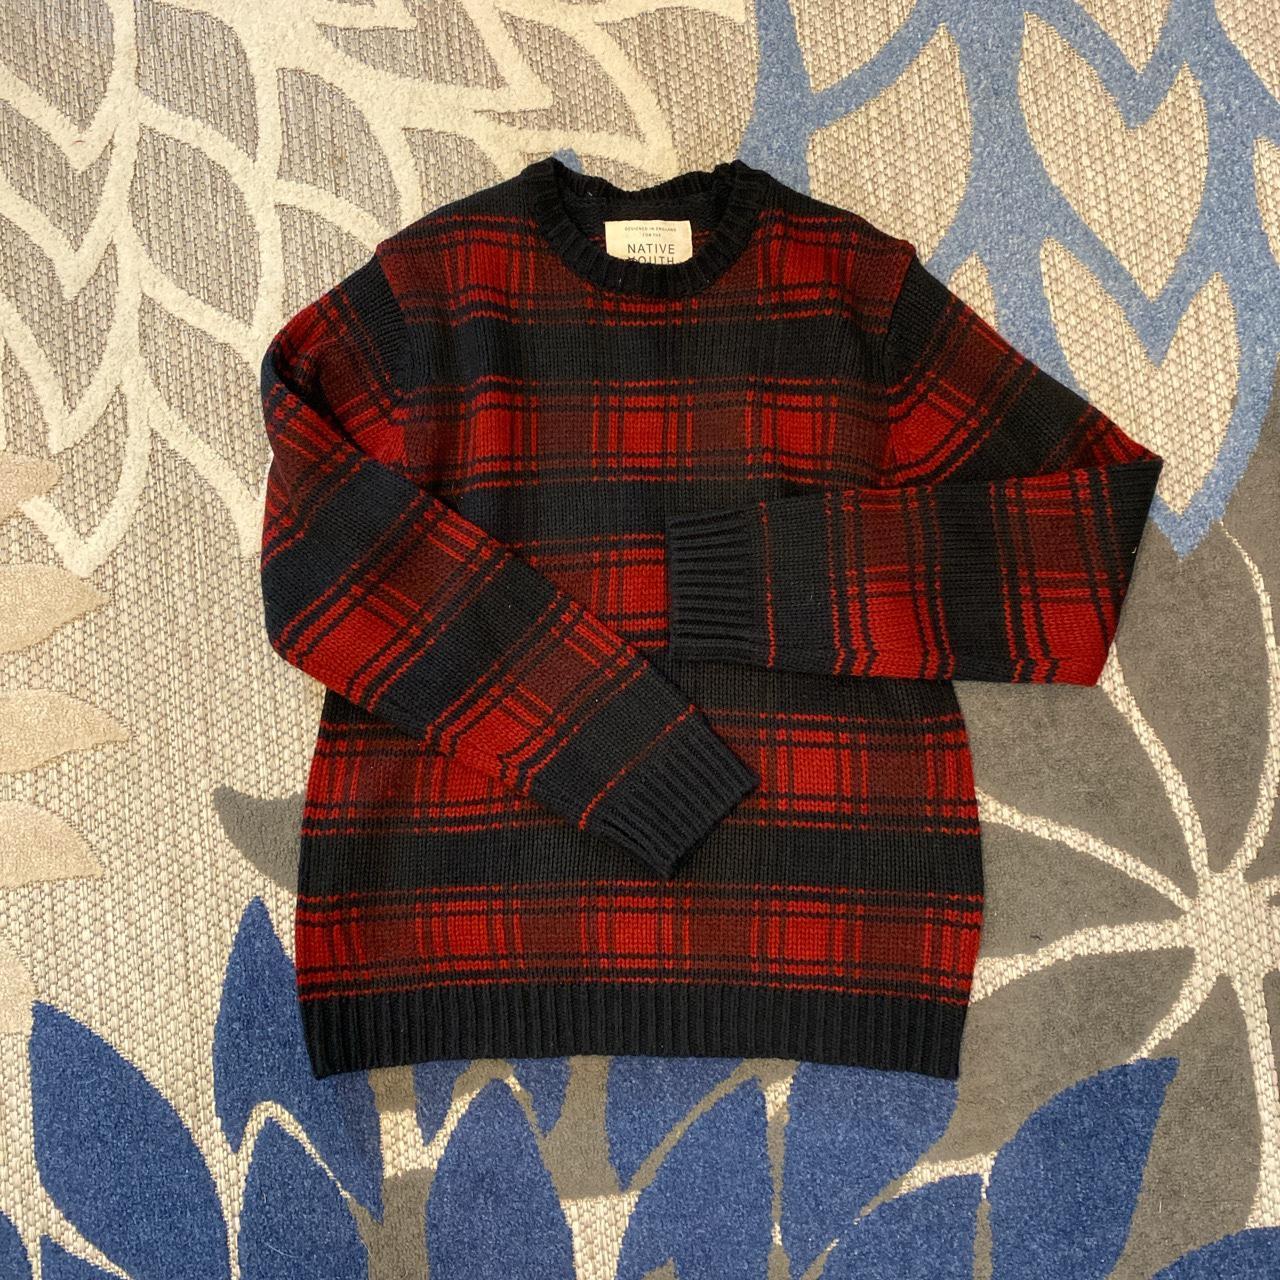 Native Youth Men's Red and Black Jumper